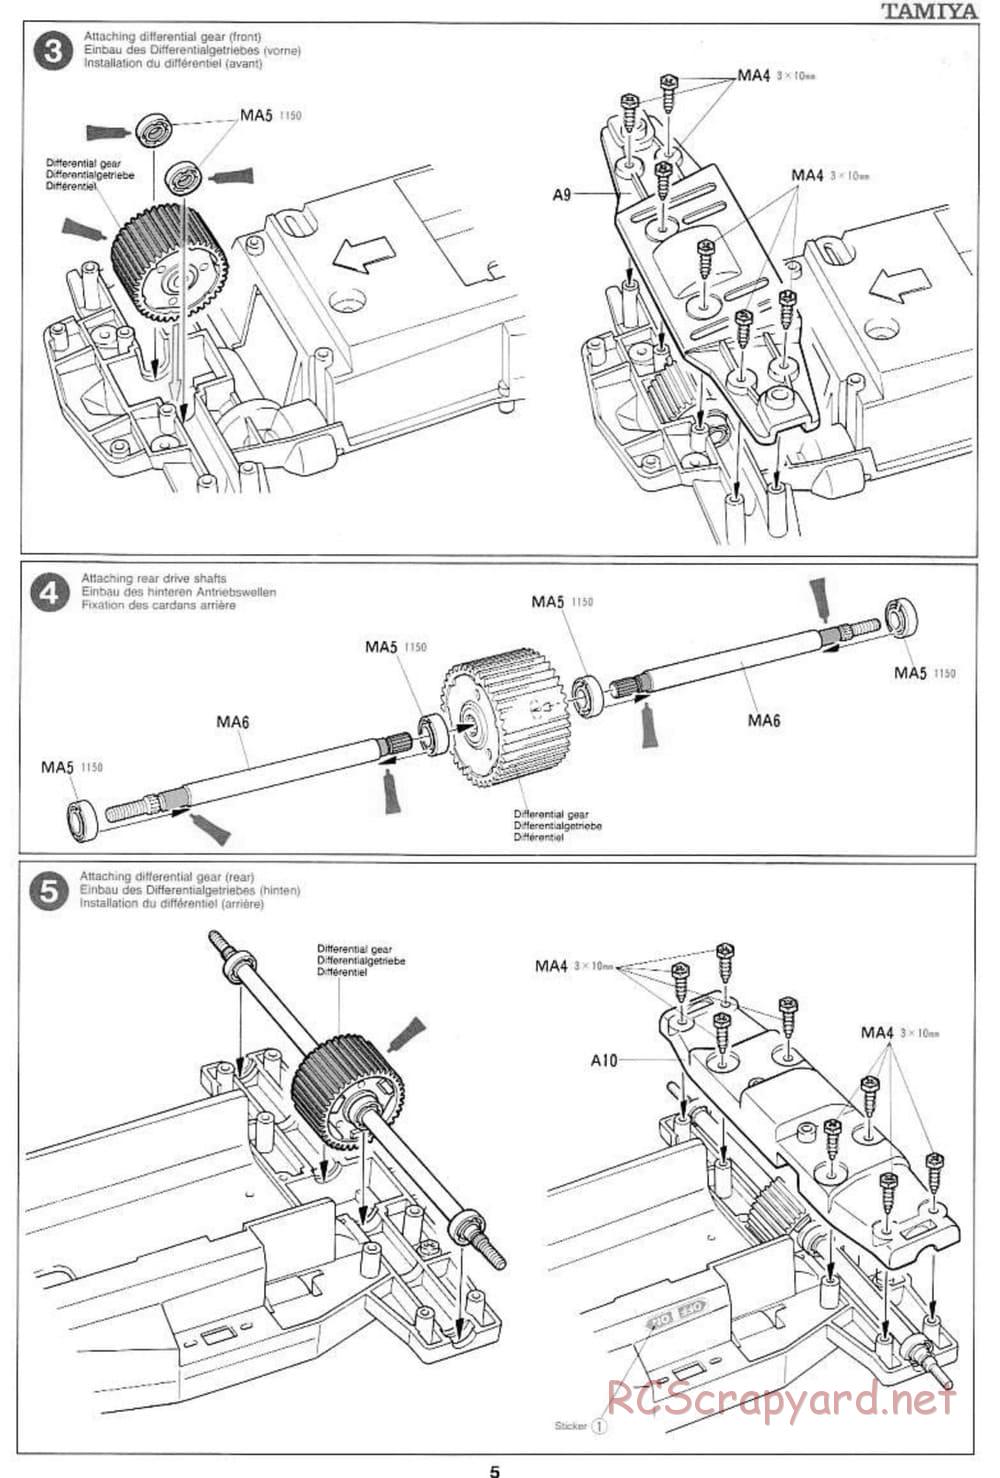 Tamiya - Voltec Fighter - Boy's 4WD Chassis - Manual - Page 5